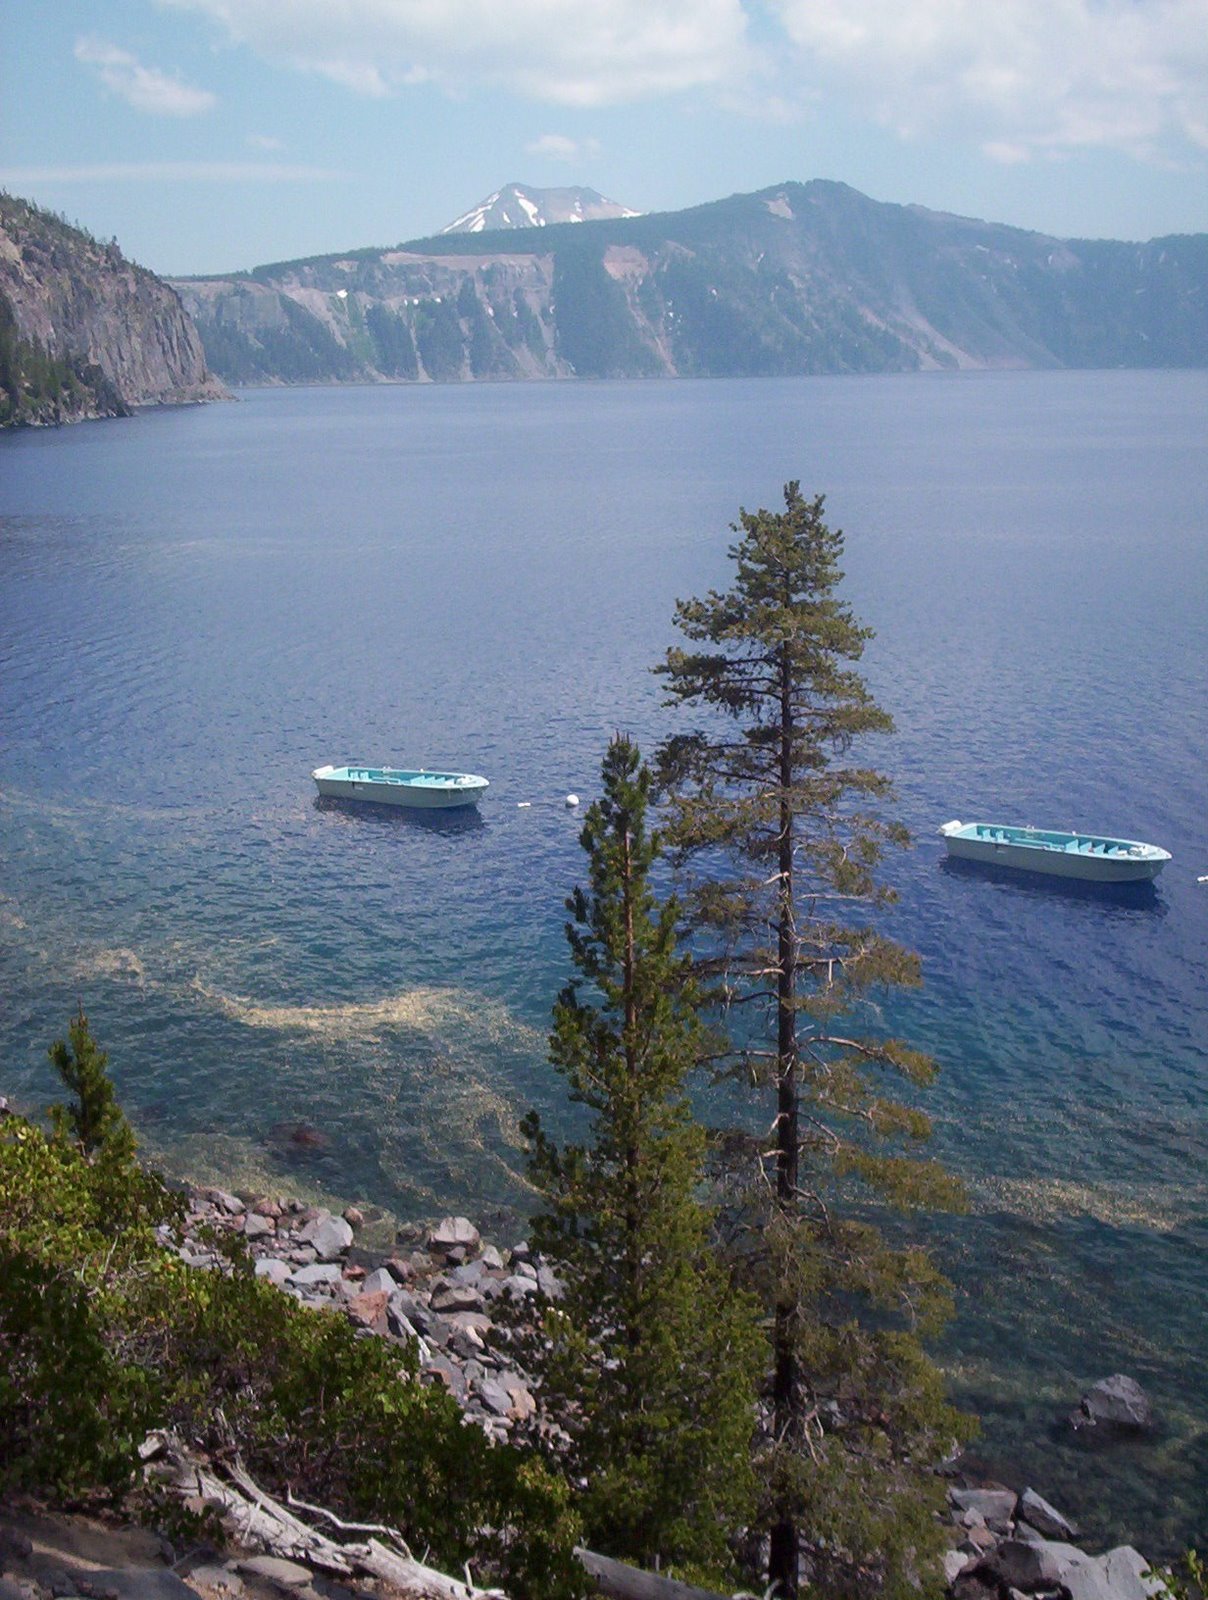 [Crater+Lake+Mount+Scott+with+Boats.JPG]